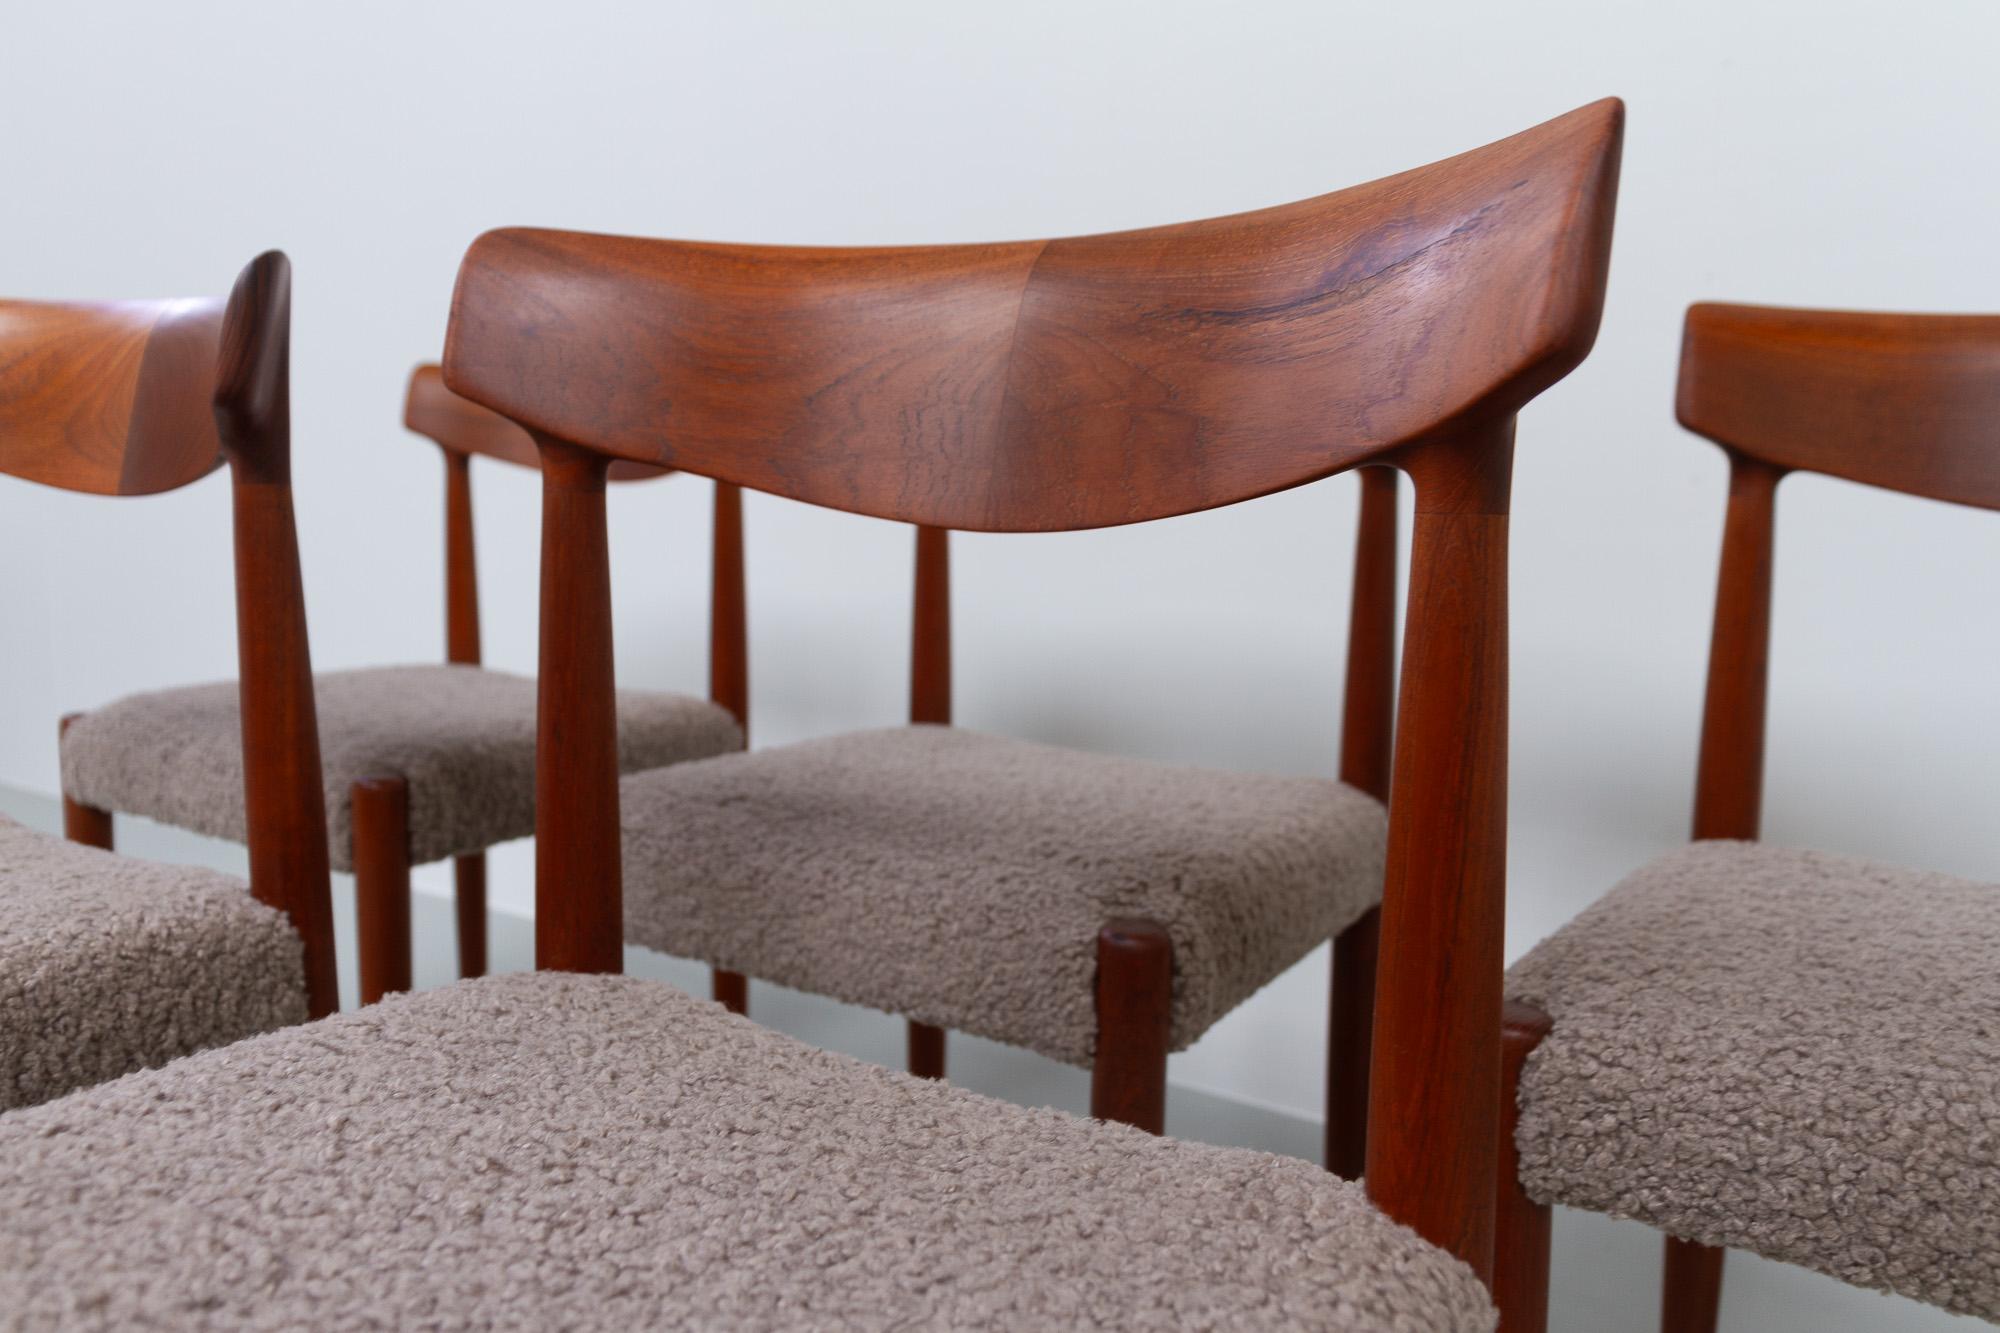 Danish Modern Teak Dining Chairs by Knud Færch for Slagelse, 1960s. Set of 6. For Sale 4